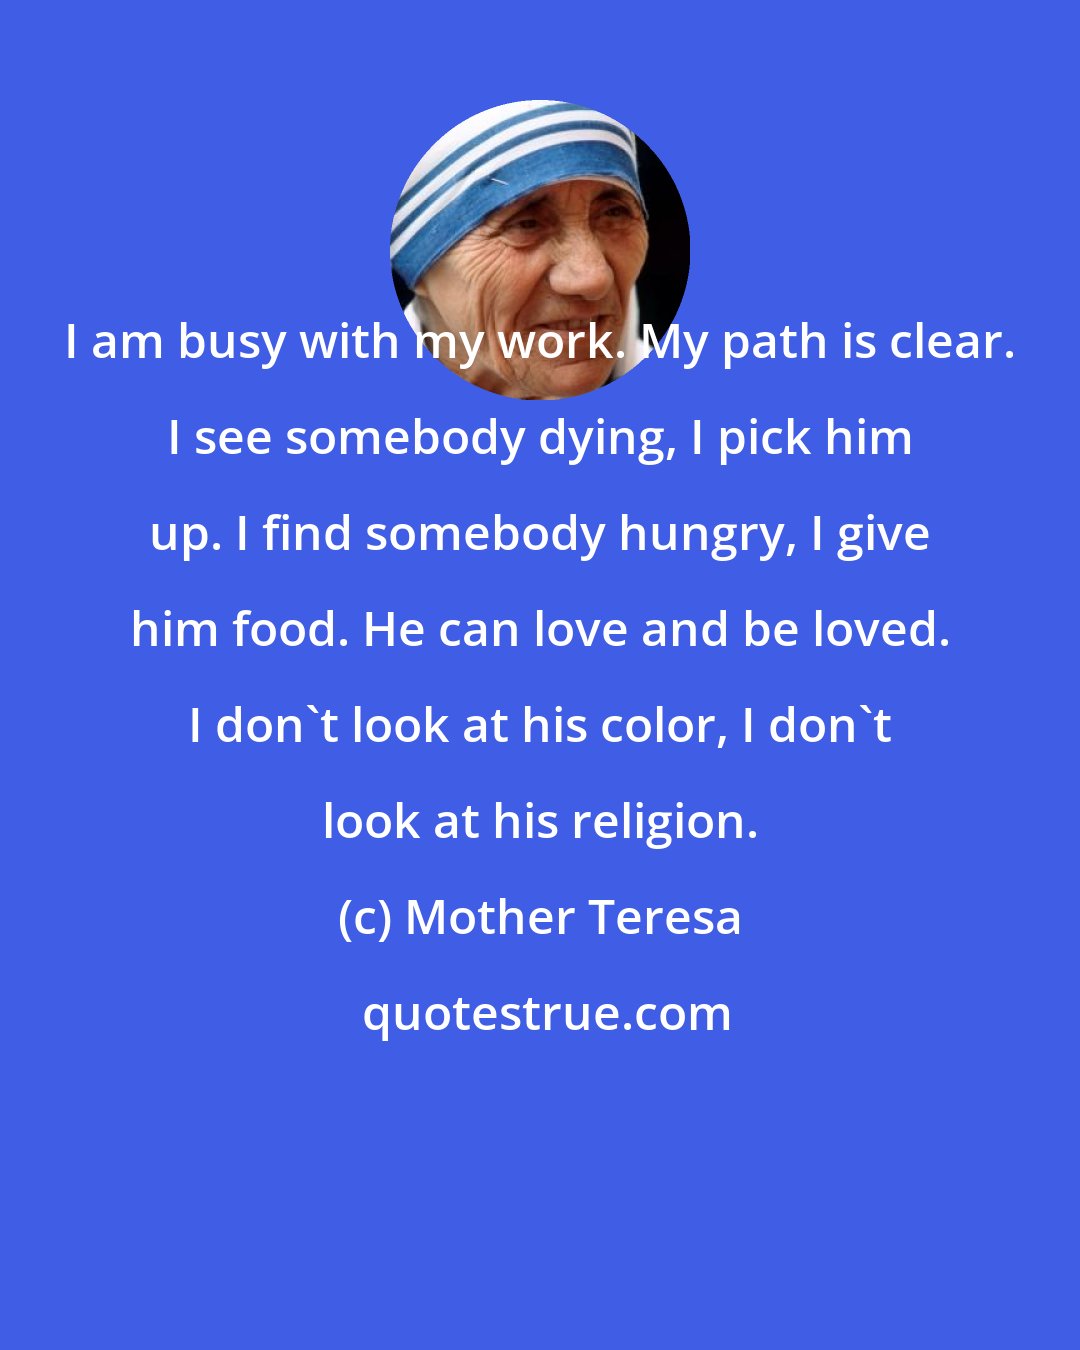 Mother Teresa: I am busy with my work. My path is clear. I see somebody dying, I pick him up. I find somebody hungry, I give him food. He can love and be loved. I don't look at his color, I don't look at his religion.